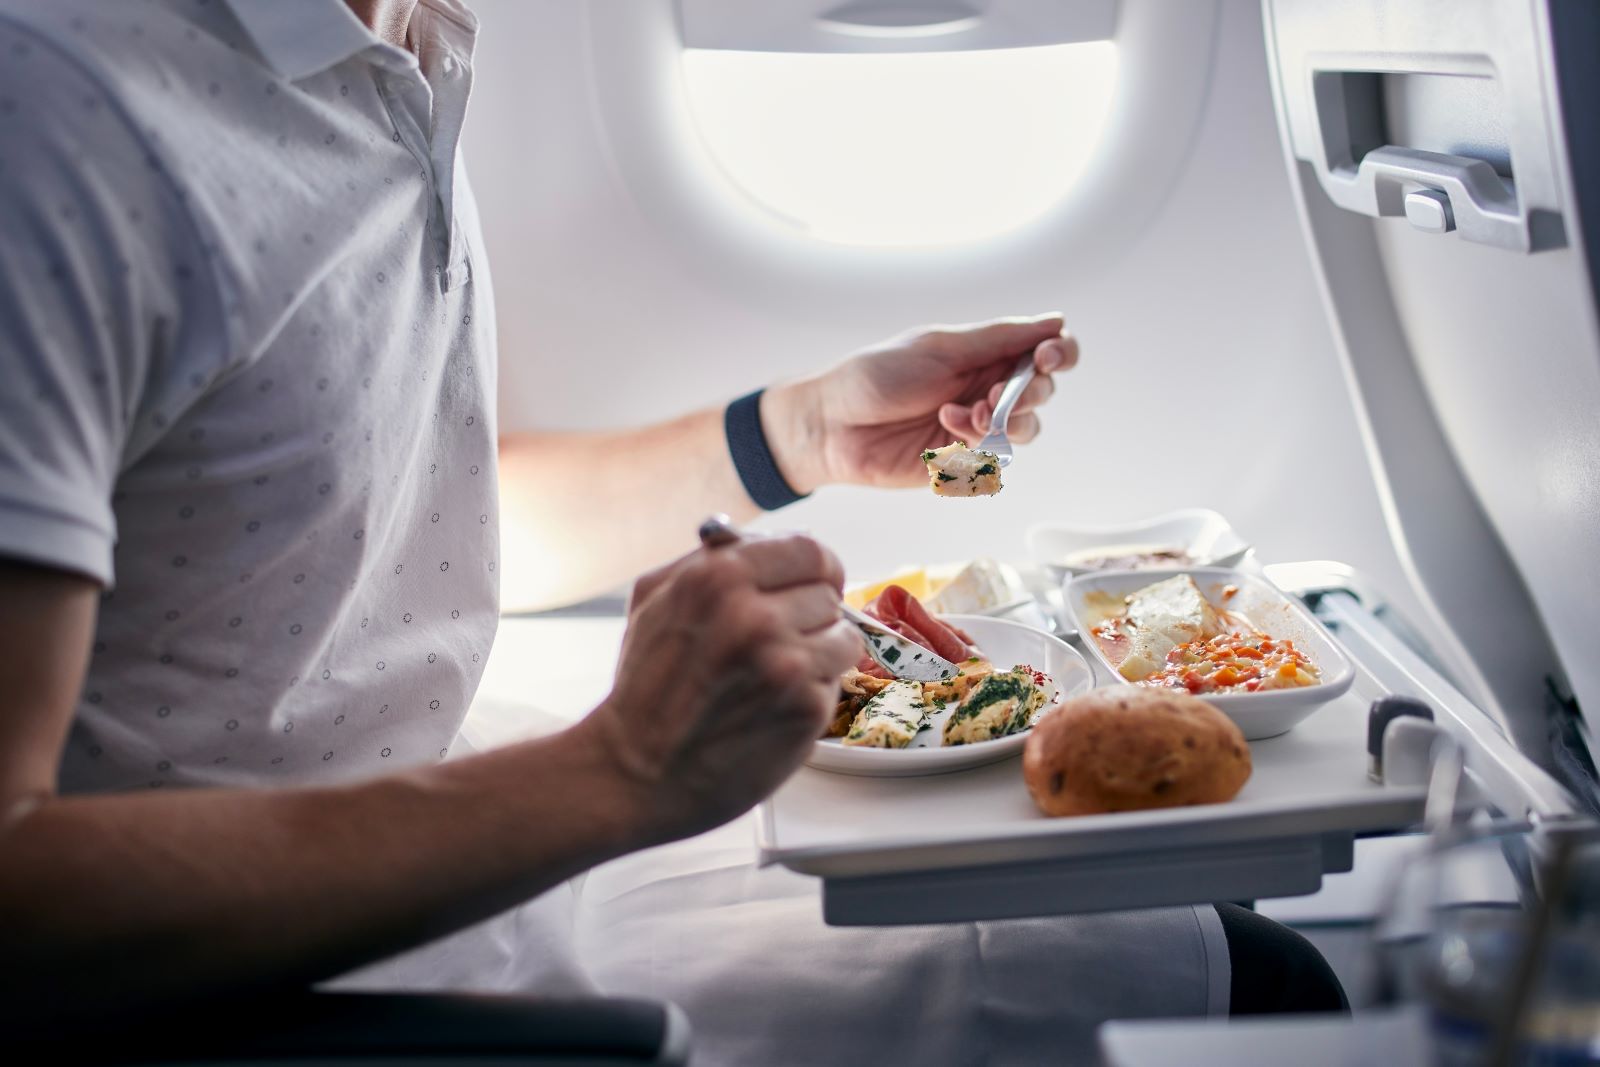 Man Eating In A Plane